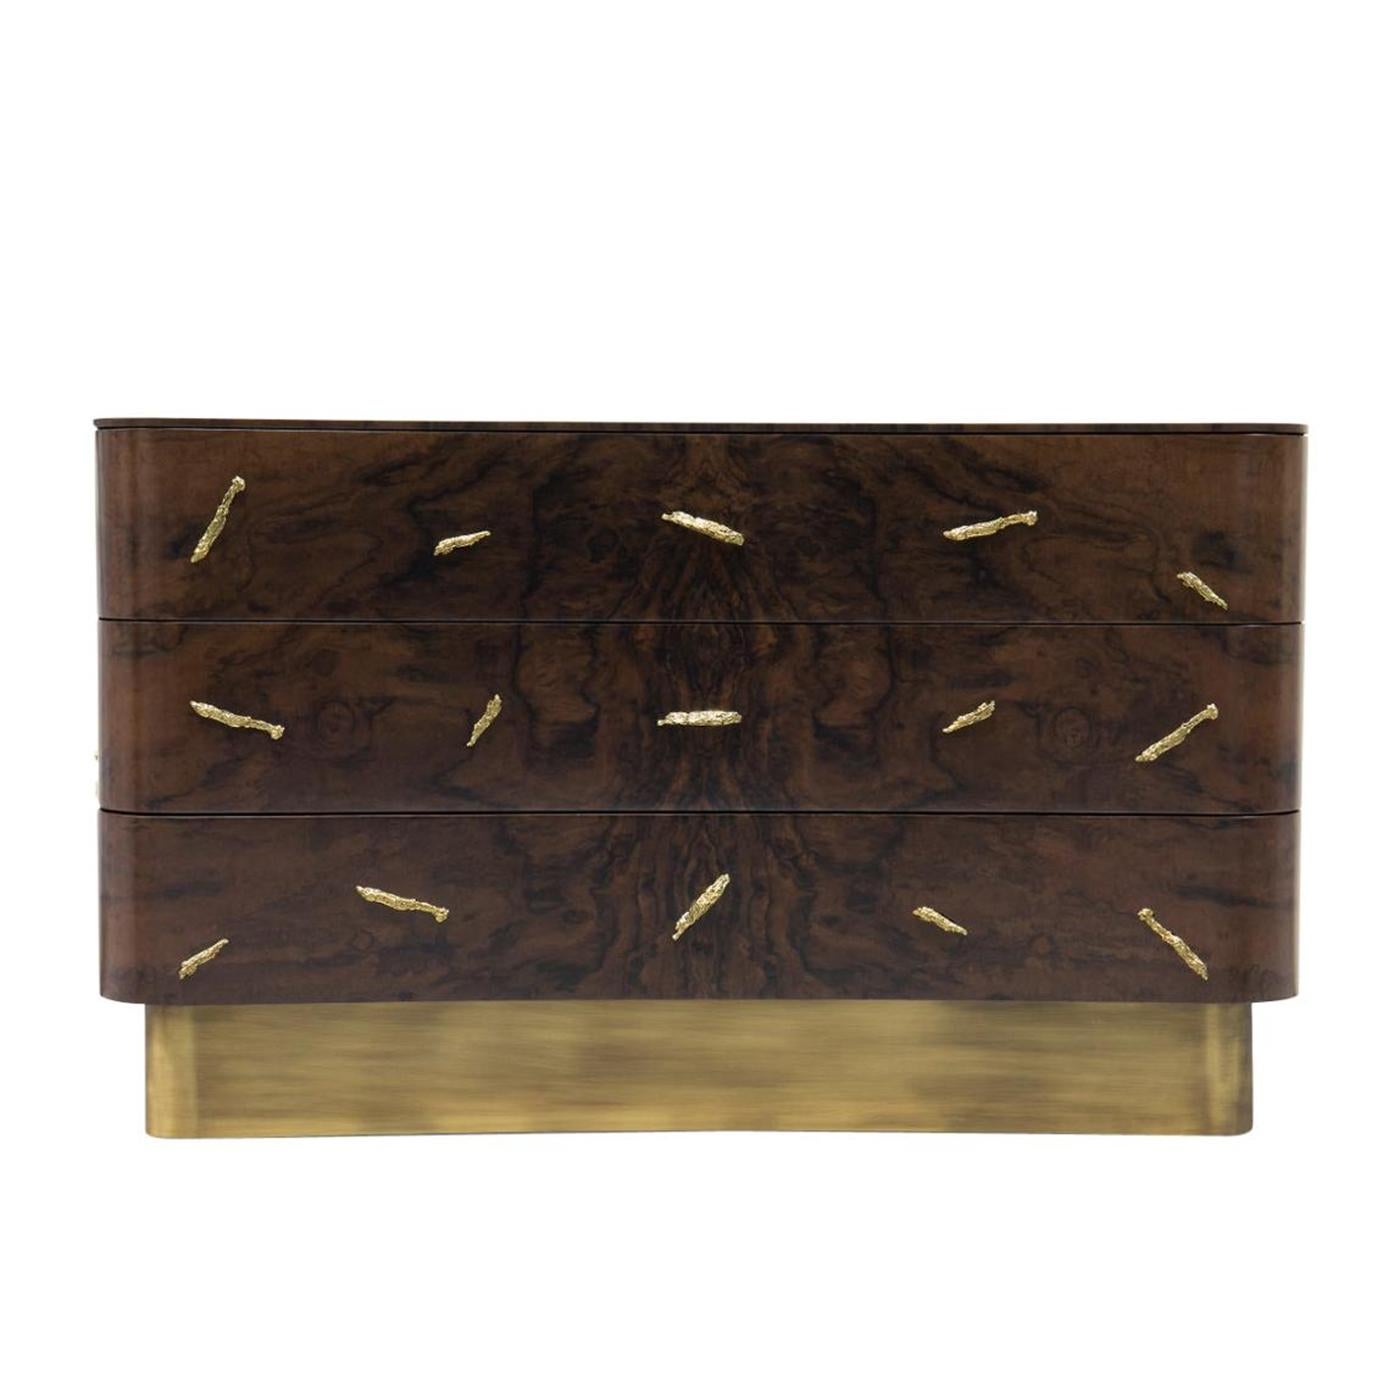 Chest of drawers Tarius with wooden structure with solid walnut
veneer in matte finish. With polished solid brass details and with
brushed aged brass base. With 3 drawers made inside with solid 
poplar wood veneer with walnut veneer fronts in matte